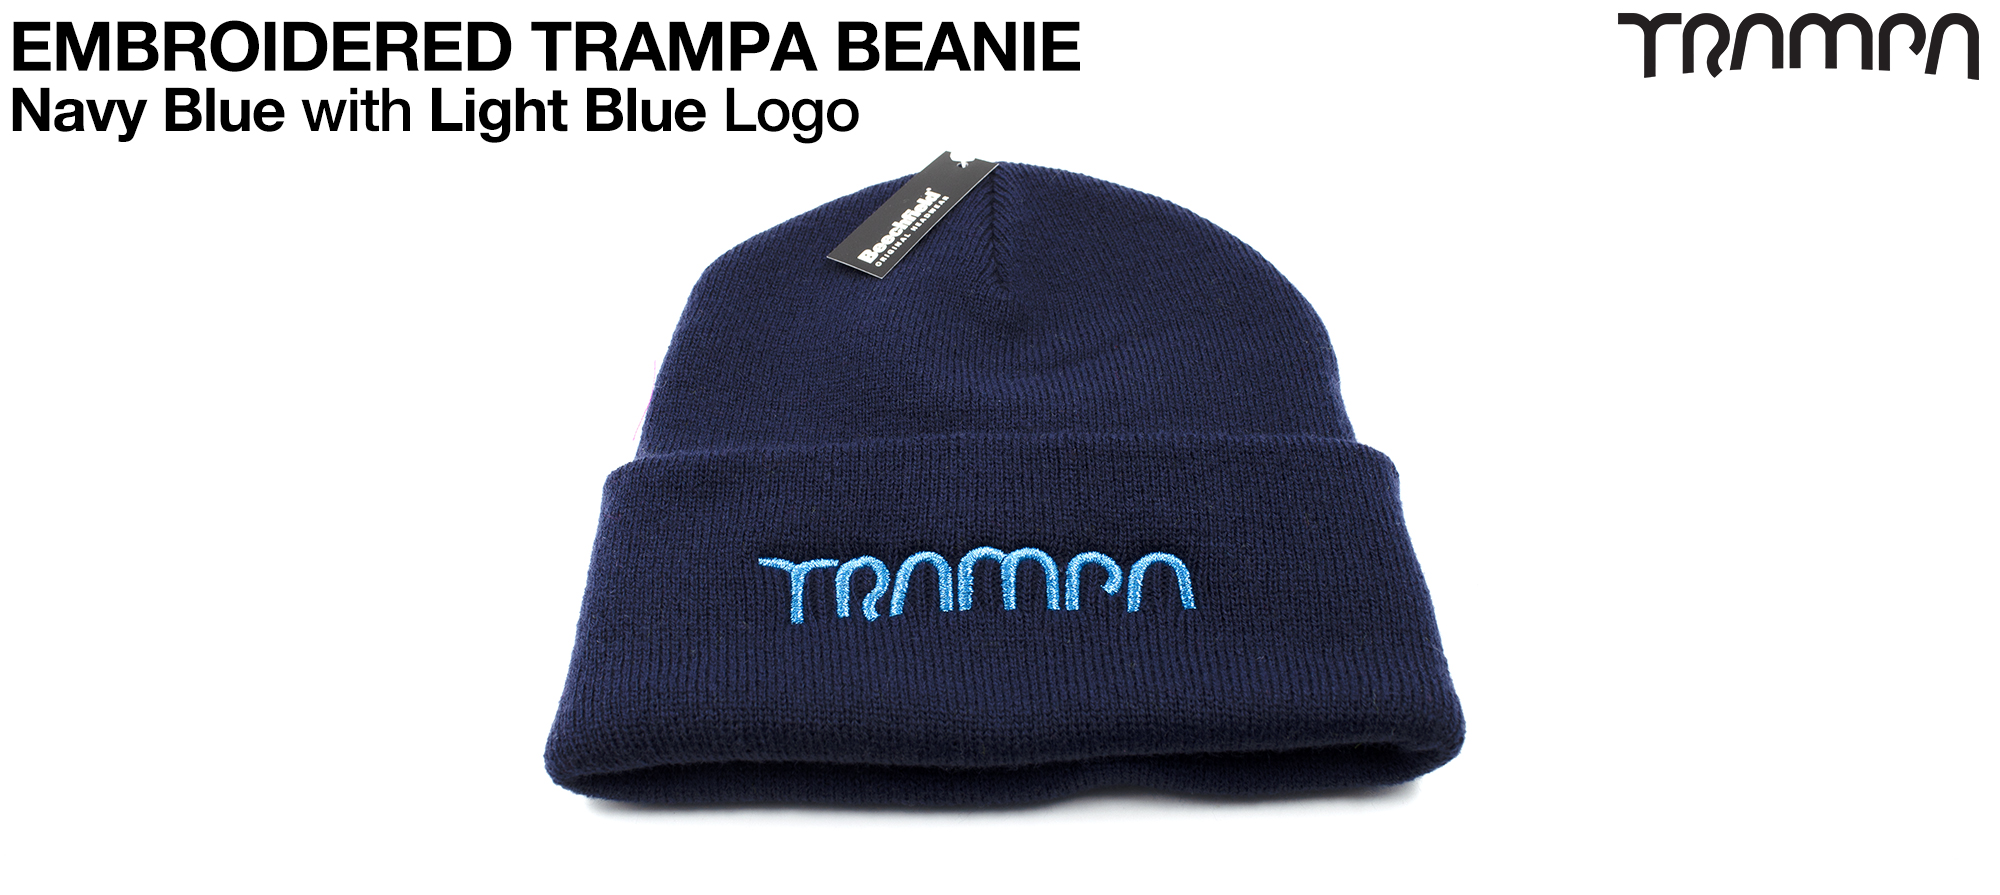 NAVY BLUE Beanie with BLUE TRAMPA logo  - Double thick turn over for extra warmth 